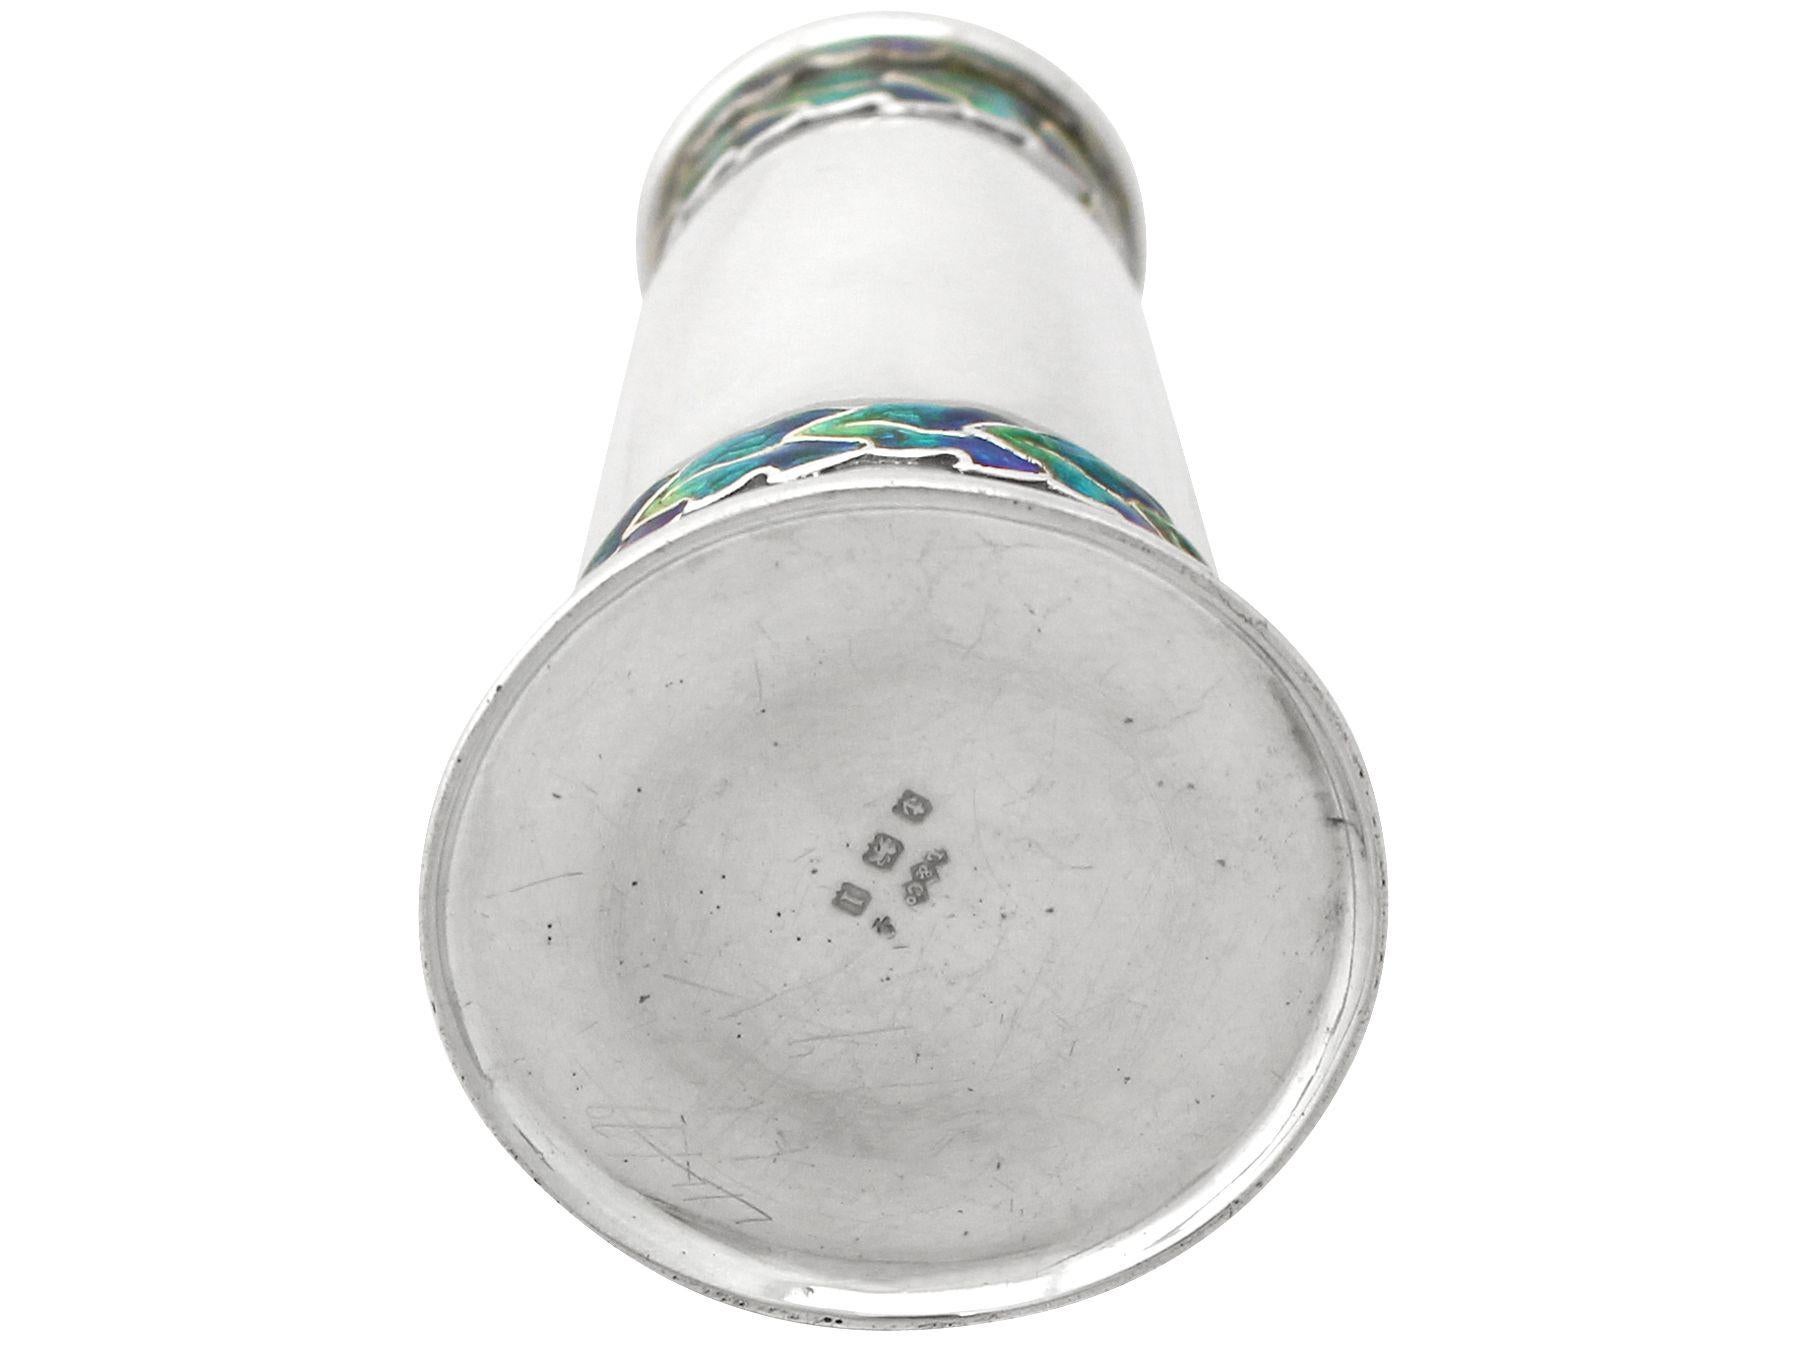 Antique Arts & Crafts Style Sterling Silver Pepper Shaker by Liberty & Co. Ltd For Sale 2